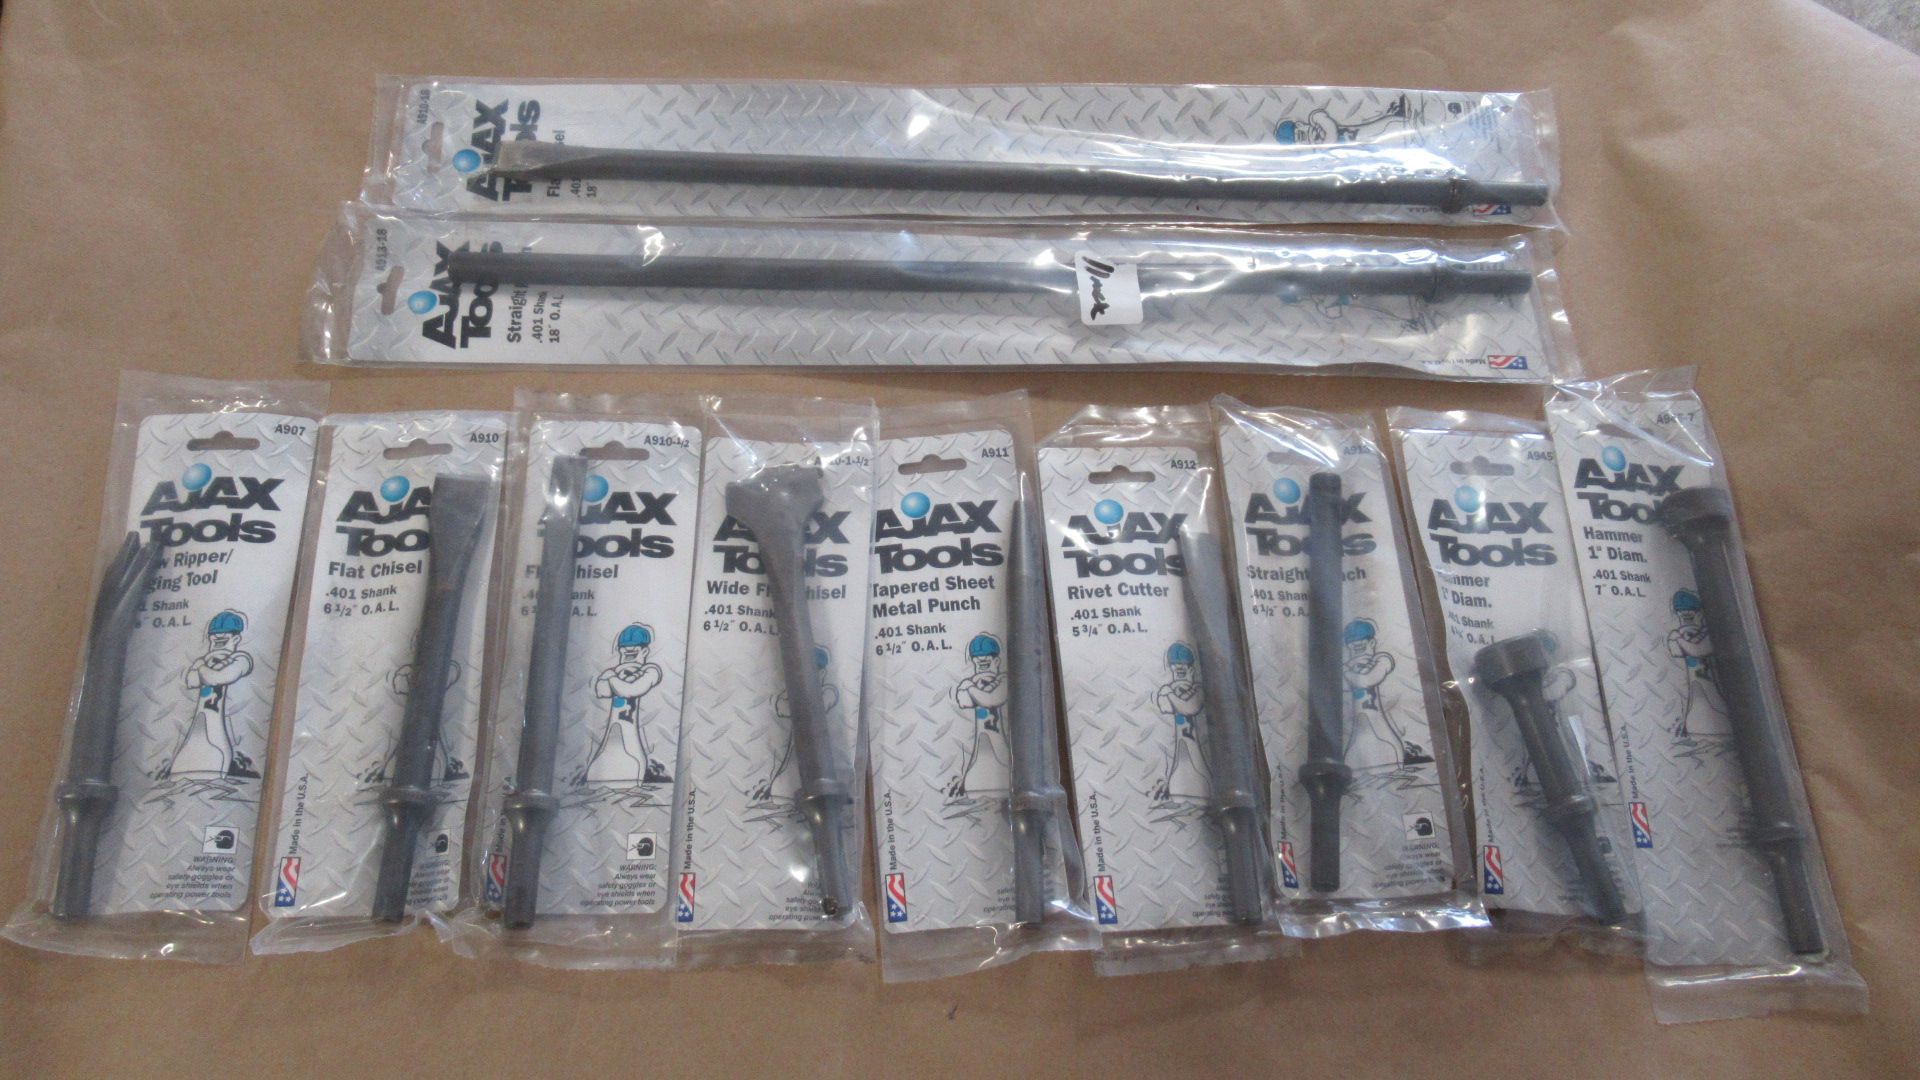 LOT OF 11 CHISELS & PUNCHES ASST AJAX TOOLS